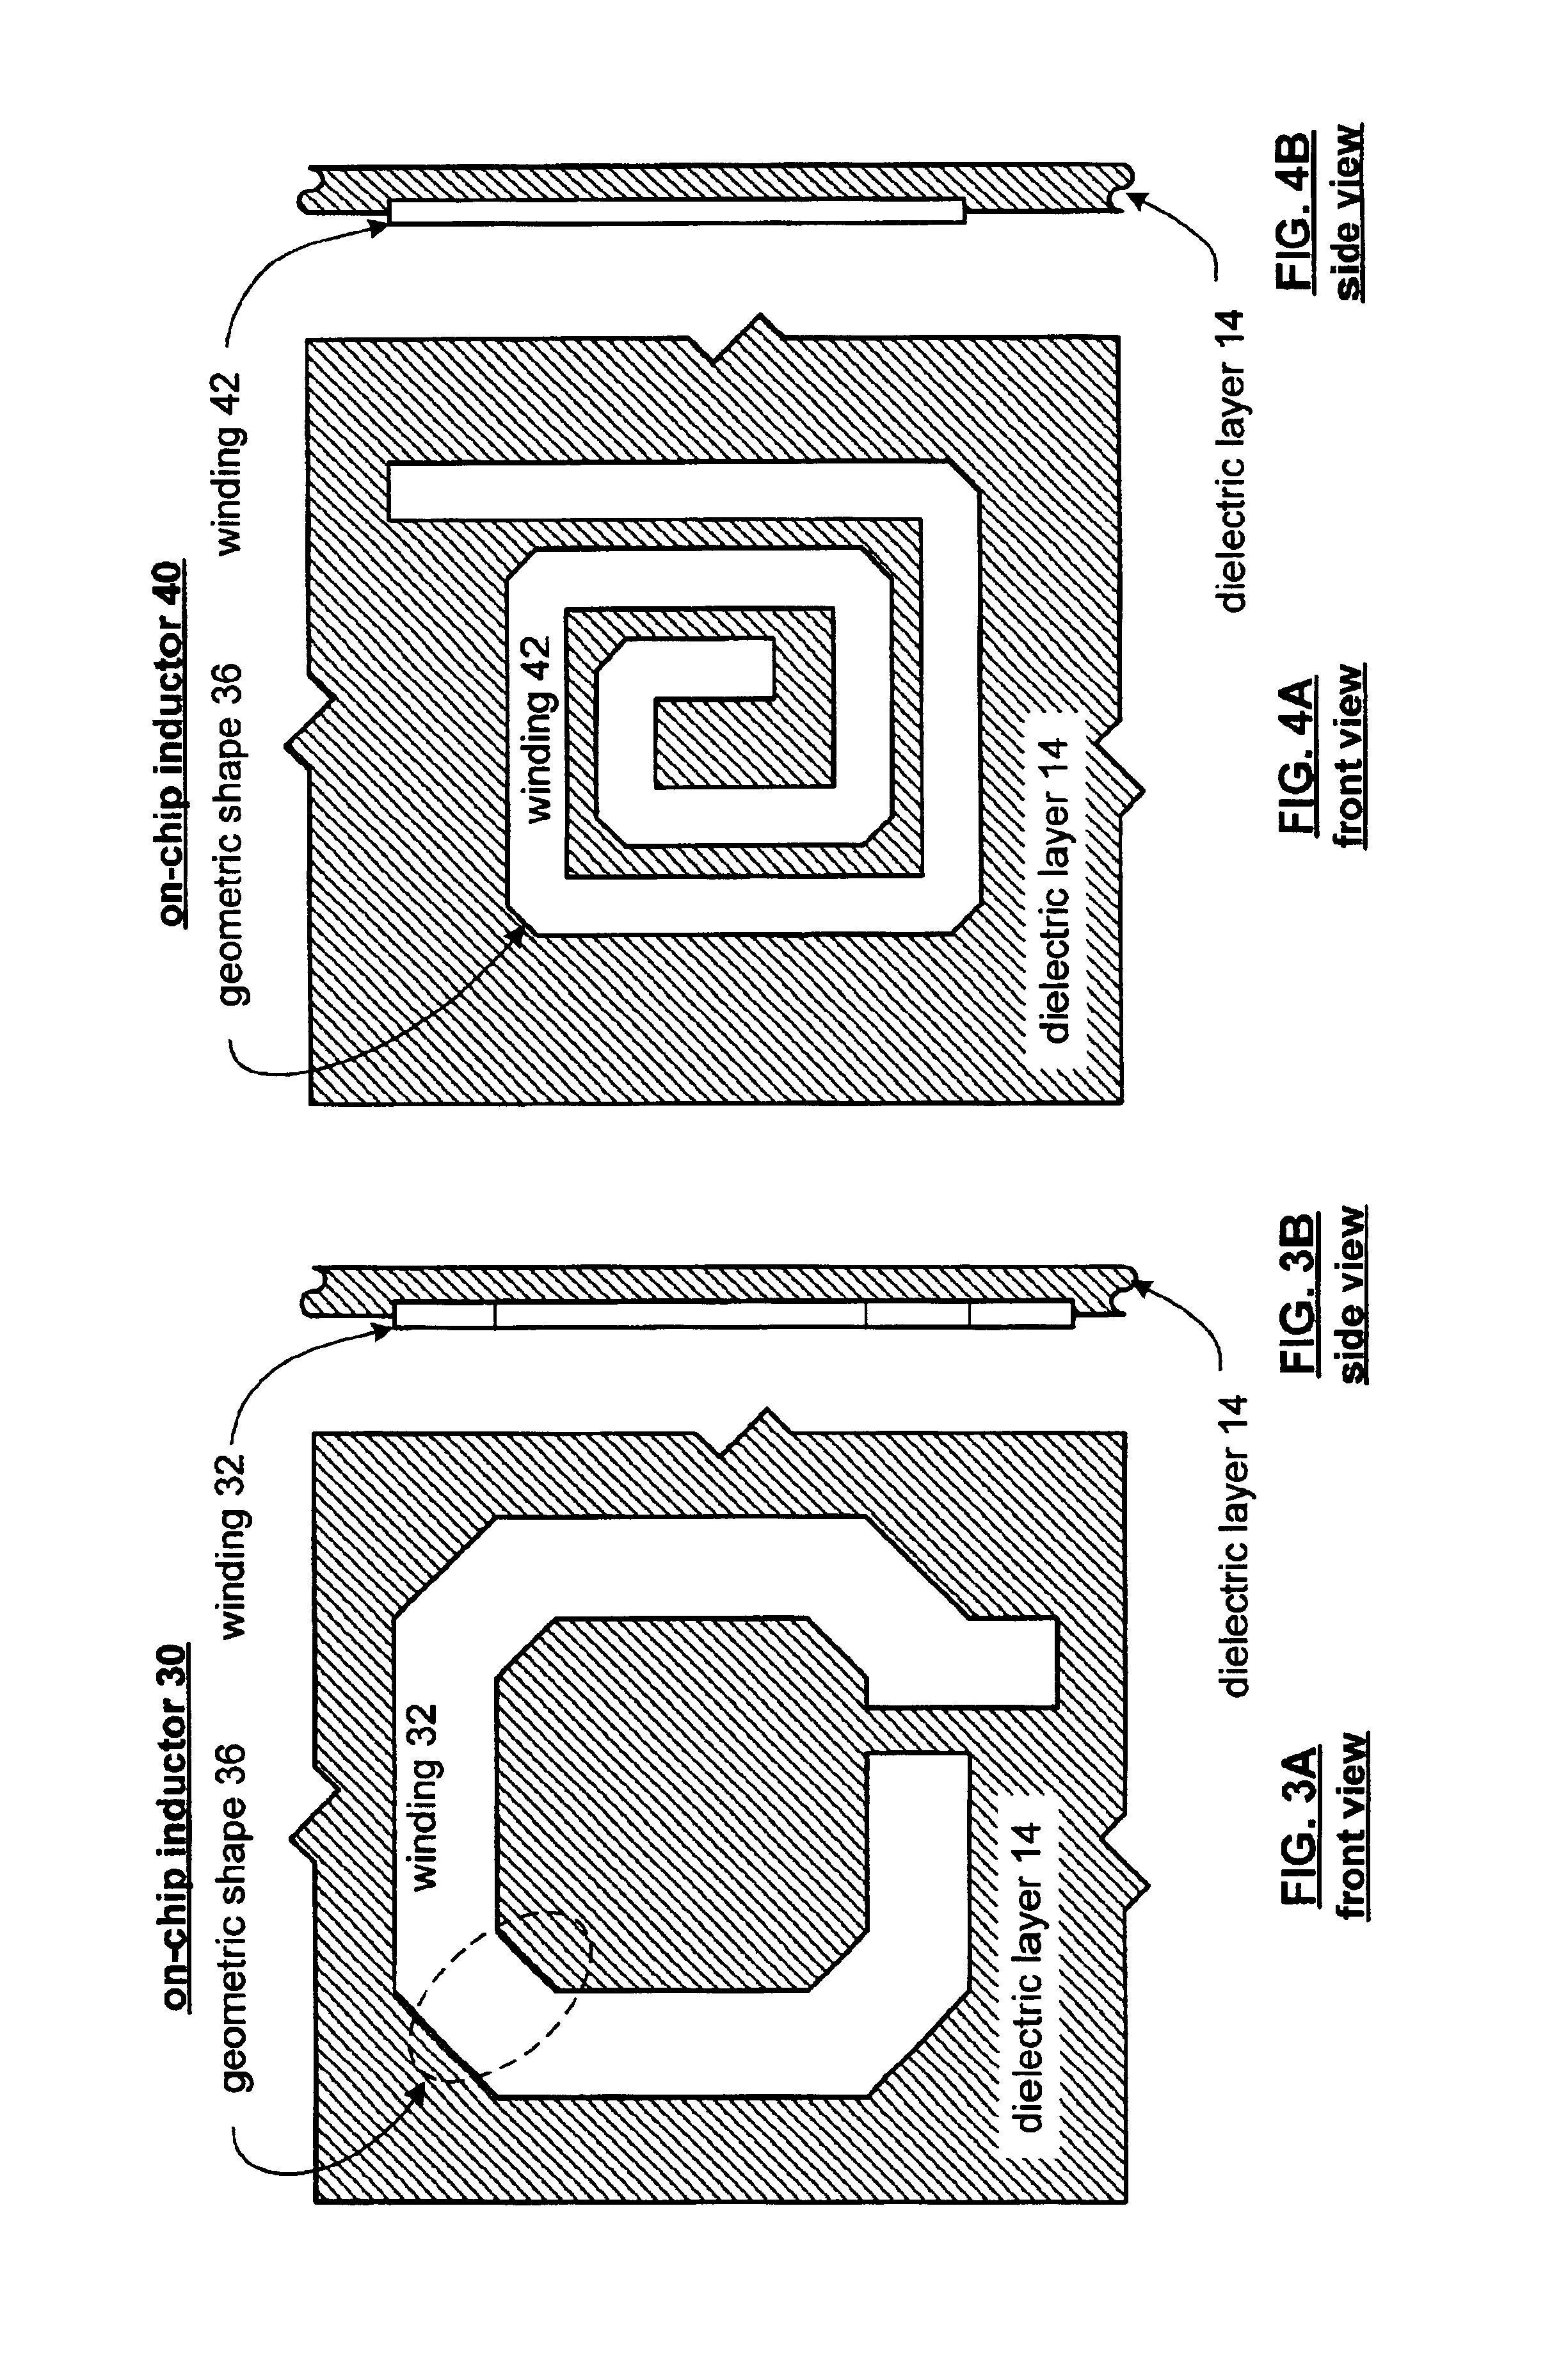 On-chip inductor having a square geometry and high Q factor and method of manufacture thereof